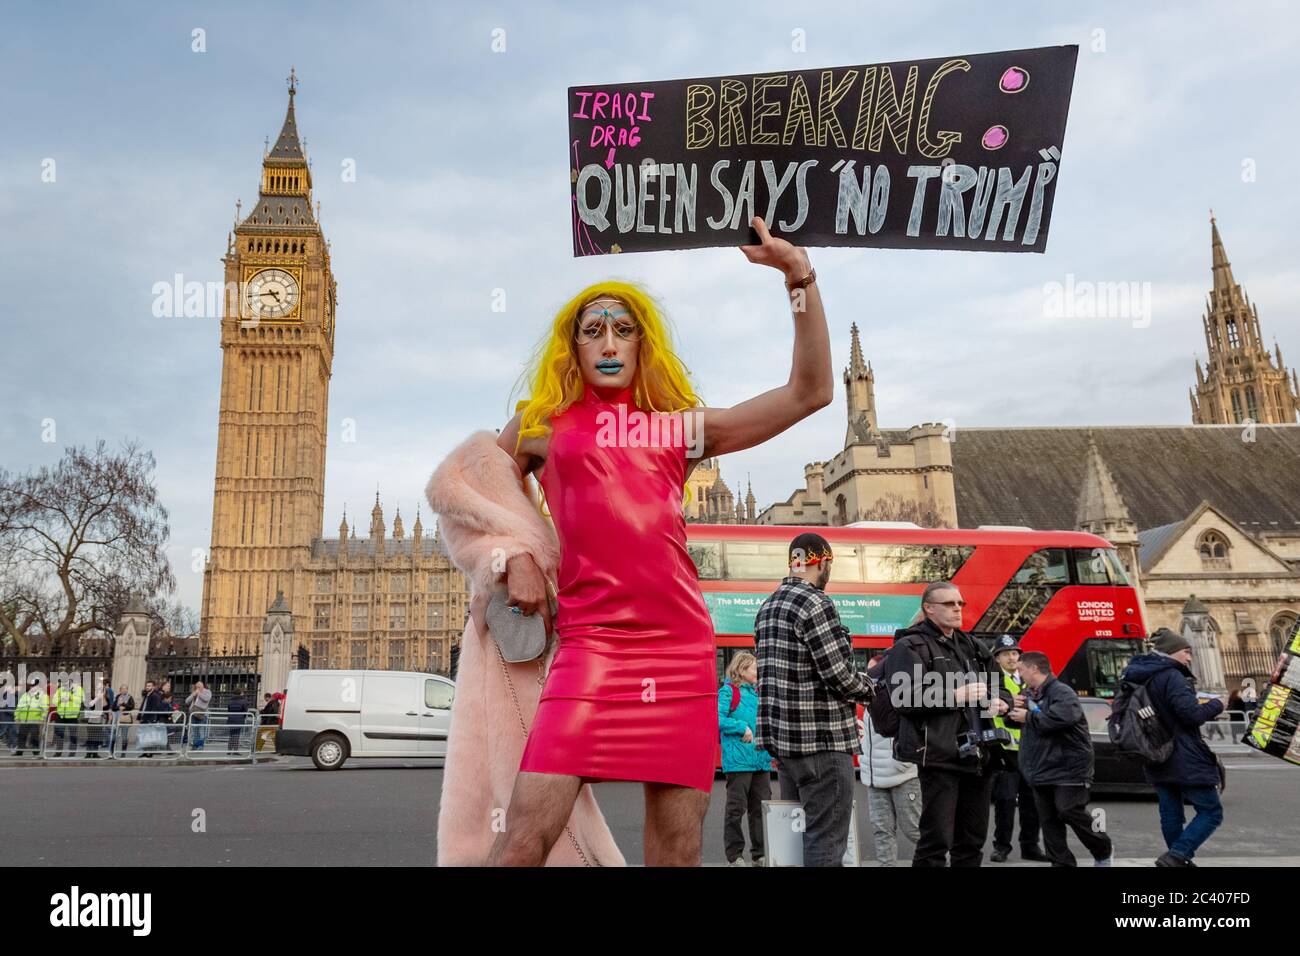 Amrou Al-Kadhi, a British-Iraqi drag queen performer and singer, joins the opposition protest to Donald Trump in Parliament Square, London, UK. Stock Photo